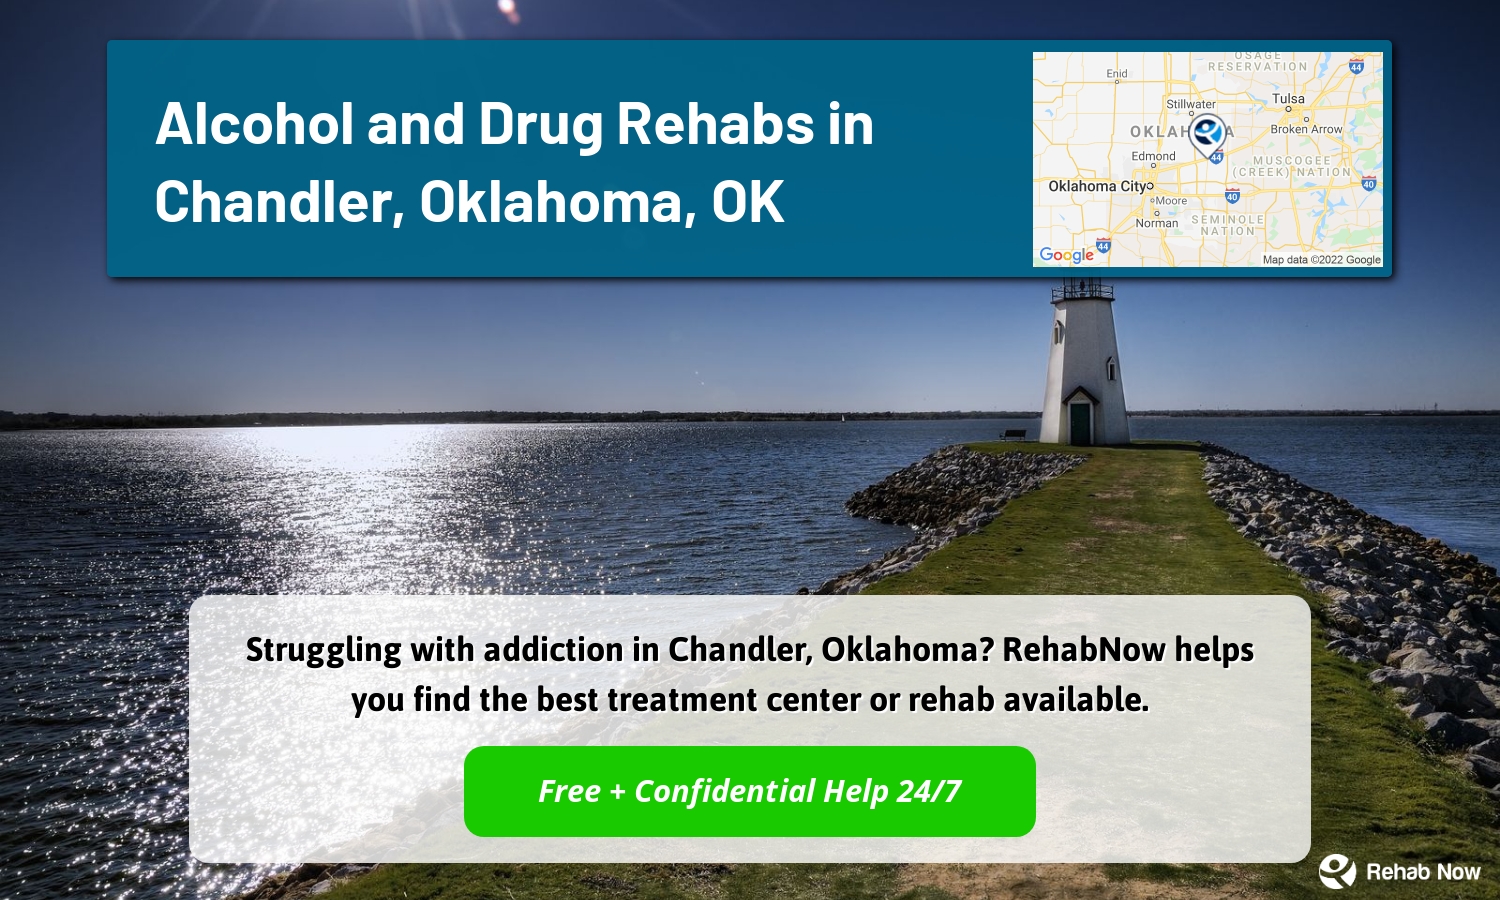 Struggling with addiction in Chandler, Oklahoma? RehabNow helps you find the best treatment center or rehab available.